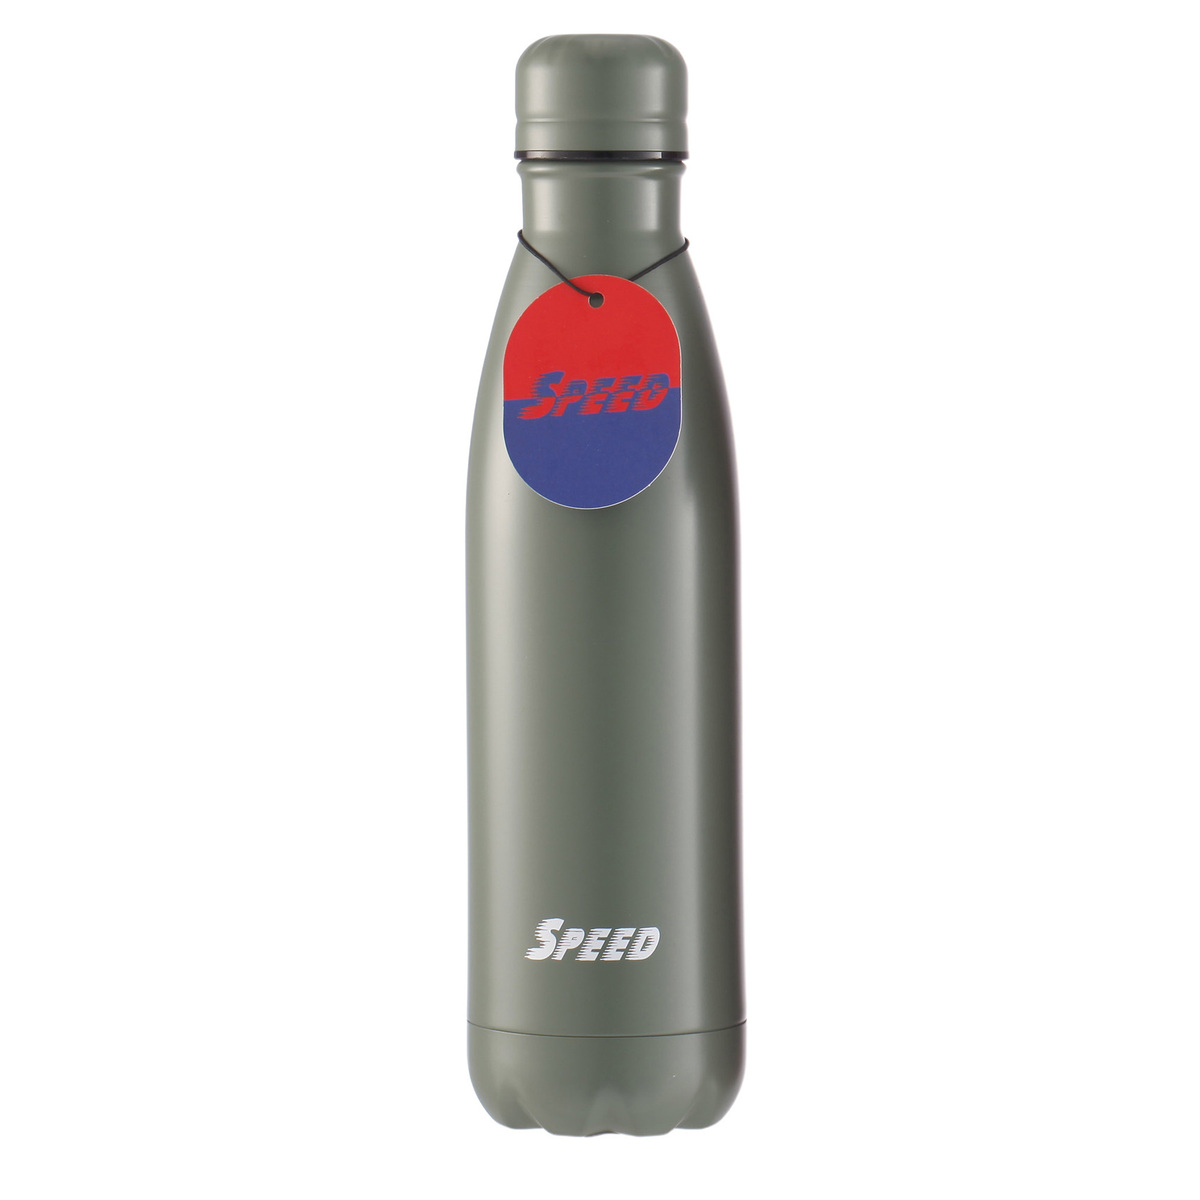 Speed Double Wall Stainless Steel Vacuum Bottle, 500 ml, Assorted Colors, 8012C